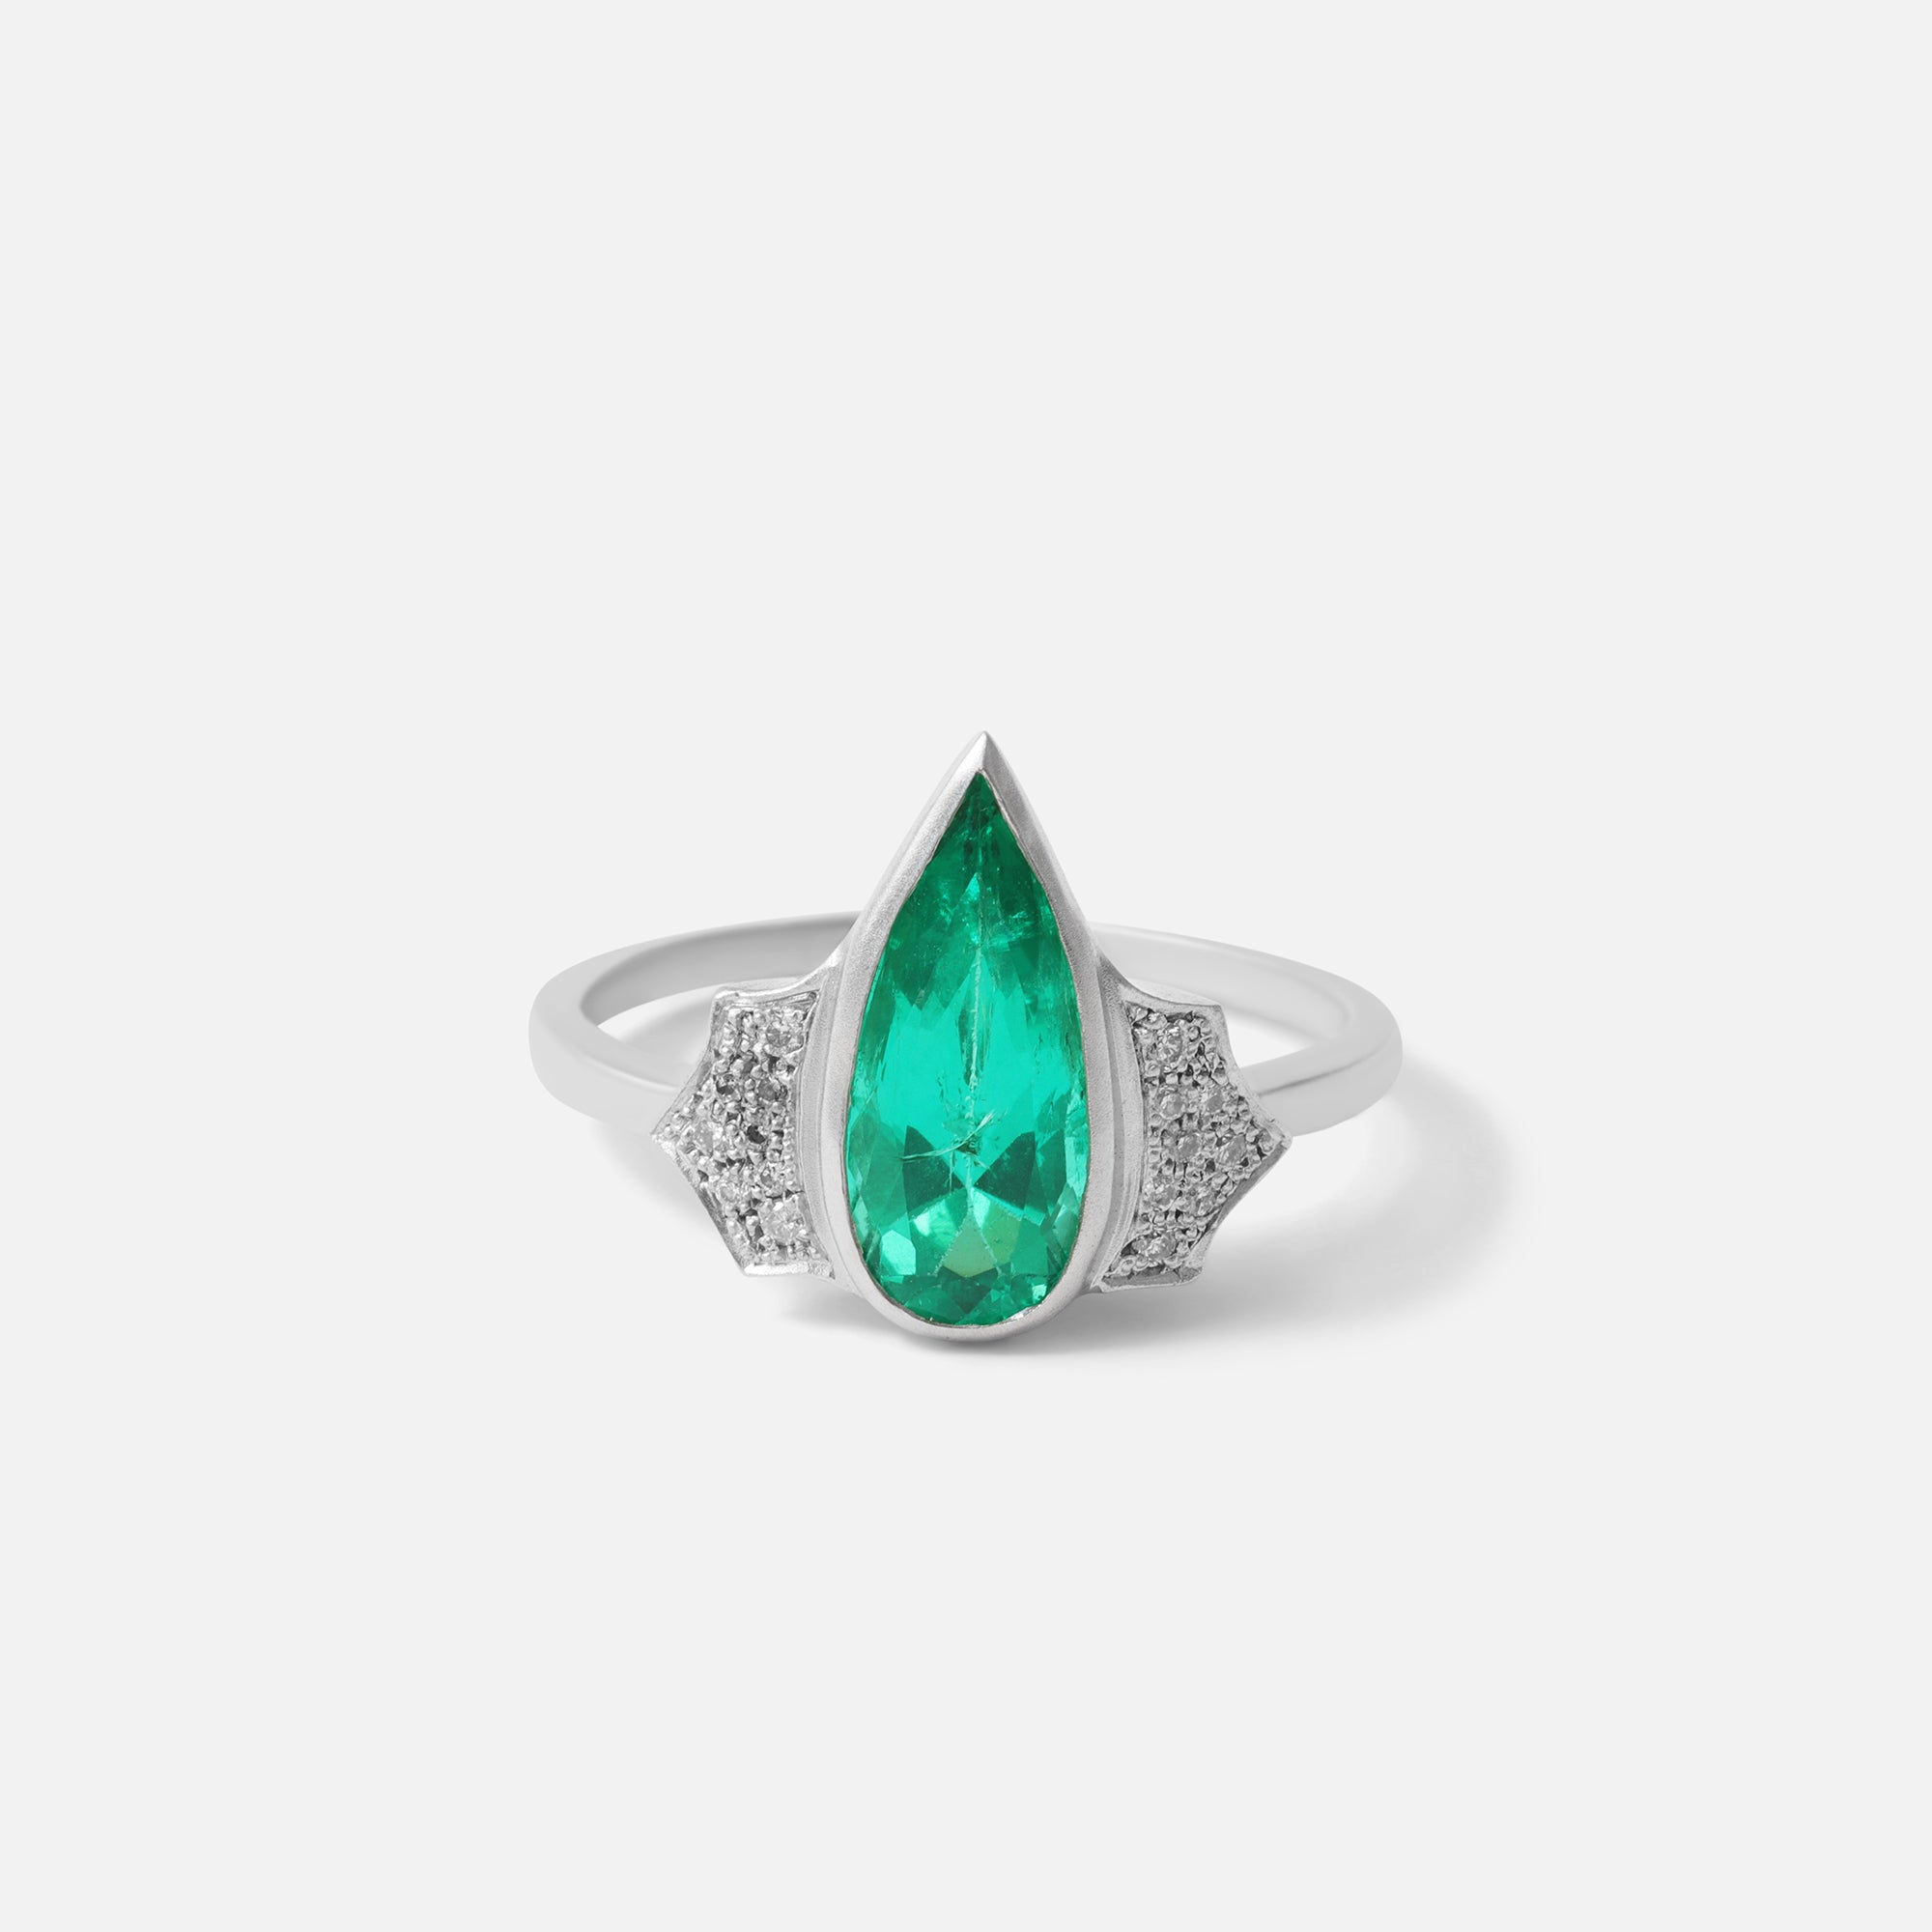 Zoraida Ring By Hiroyo in ENGAGEMENT Category